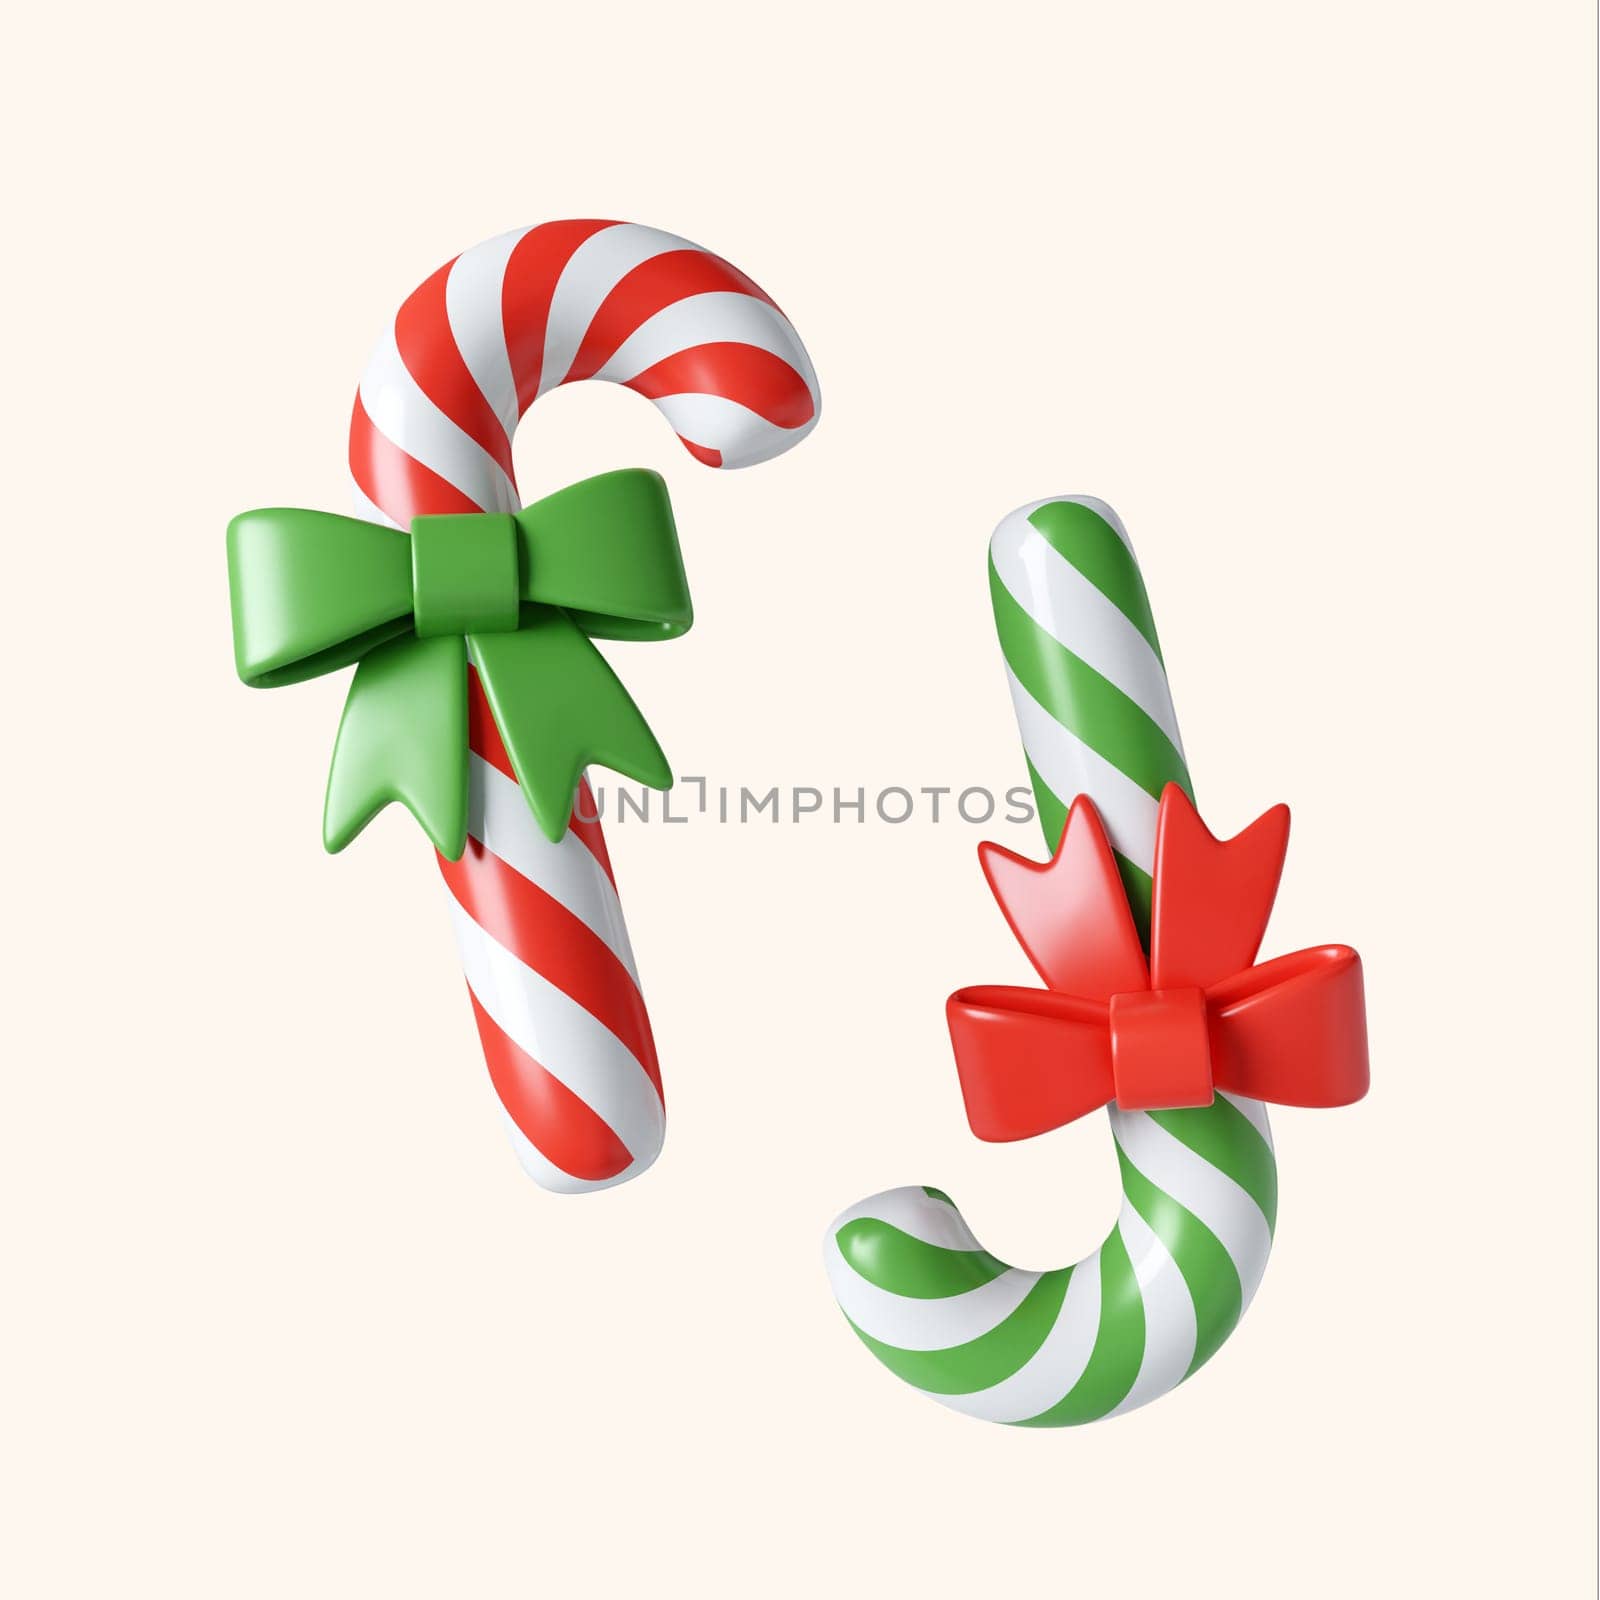 3d Christmas candy icon. minimal decorative festive conical shape tree. New Year's holiday decor. 3d design element In cartoon style. Icon isolated on white background. 3D illustration by meepiangraphic